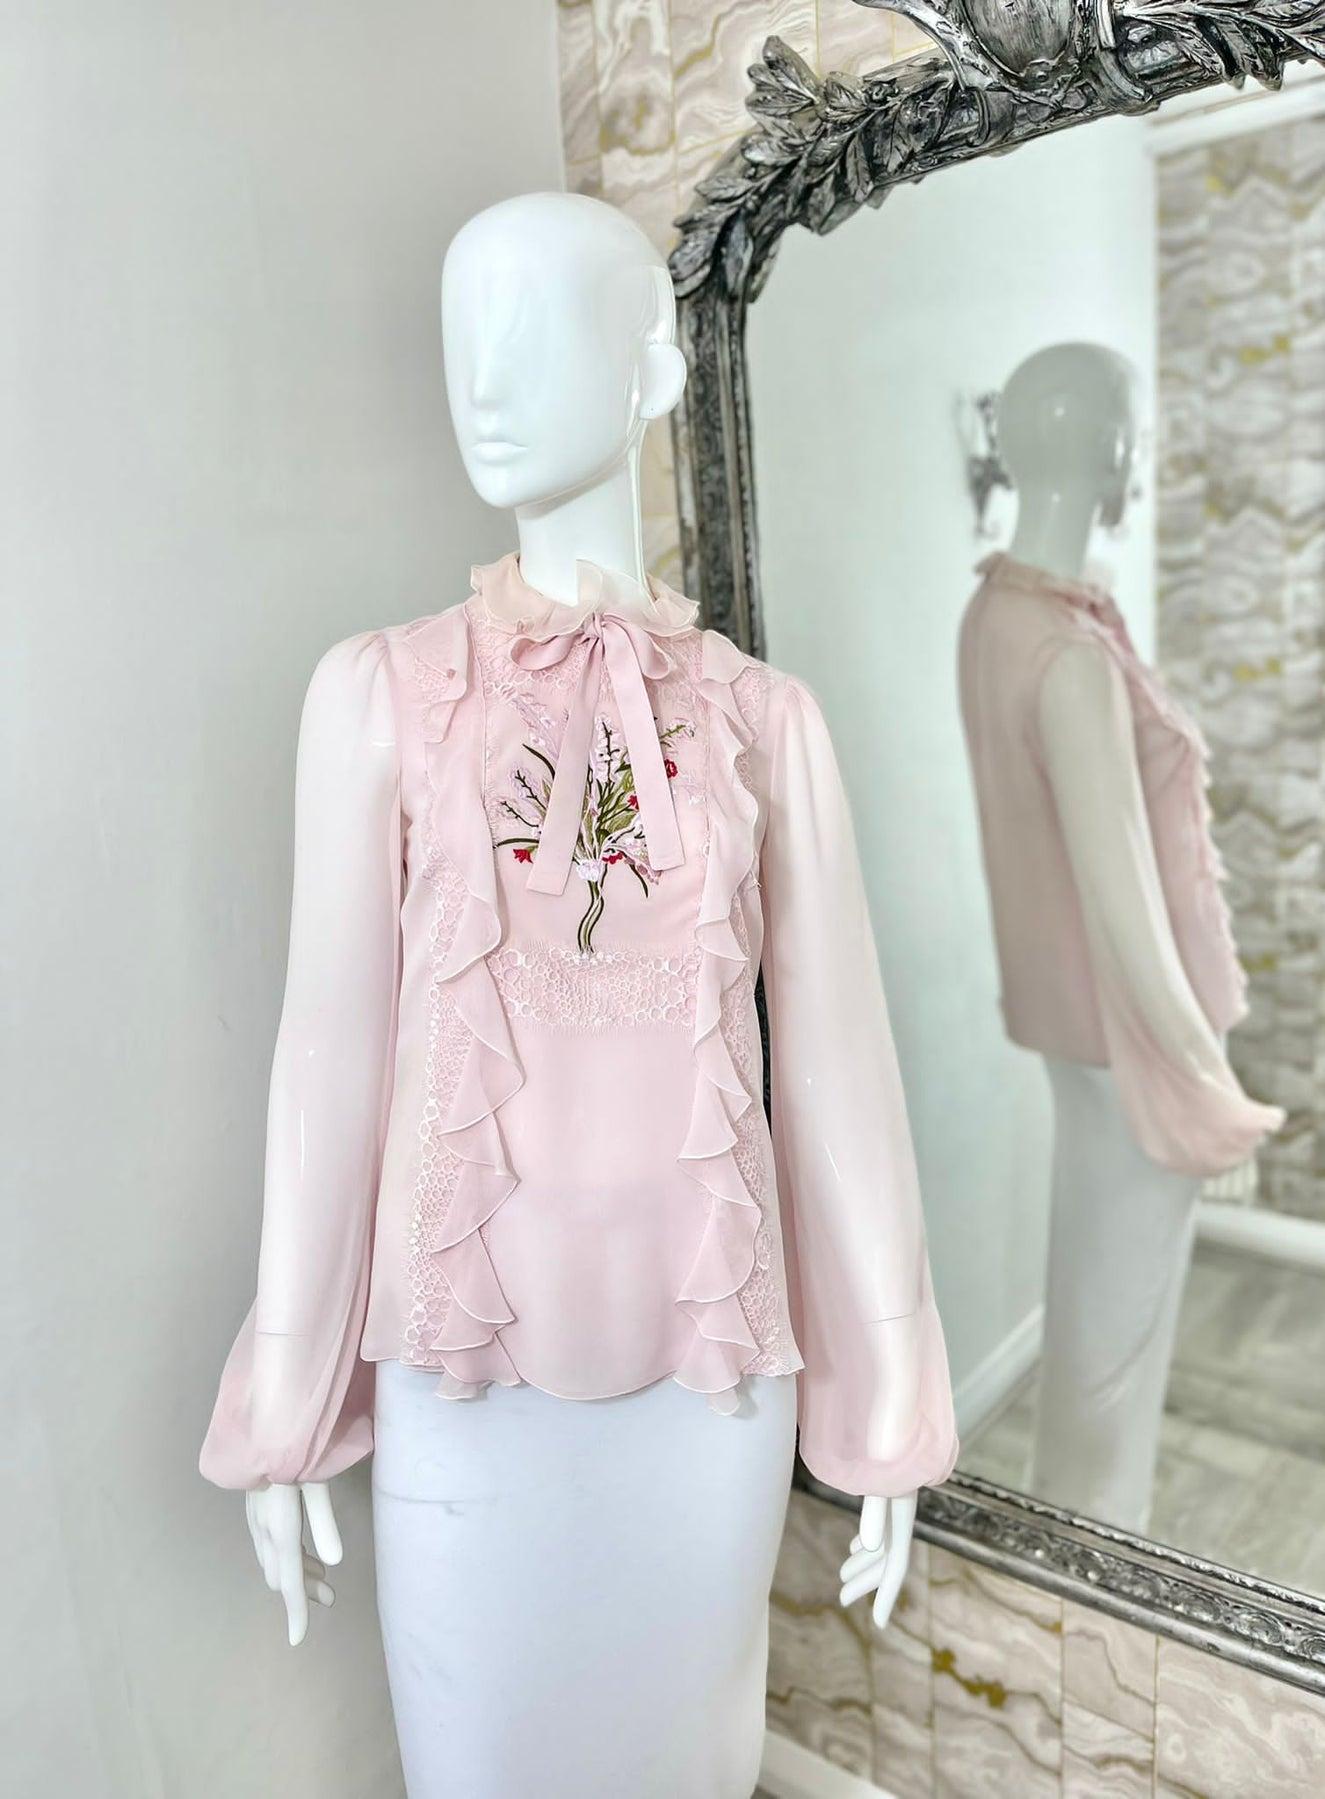 Giambatista Valli Silk & Embroidered Georgette Blouse

Sheer pink, ruffle high neck blouse with pussy bow and floral embroidery

Additional information:
Size – 38IT
Composition- Silk
Condition – Very Good